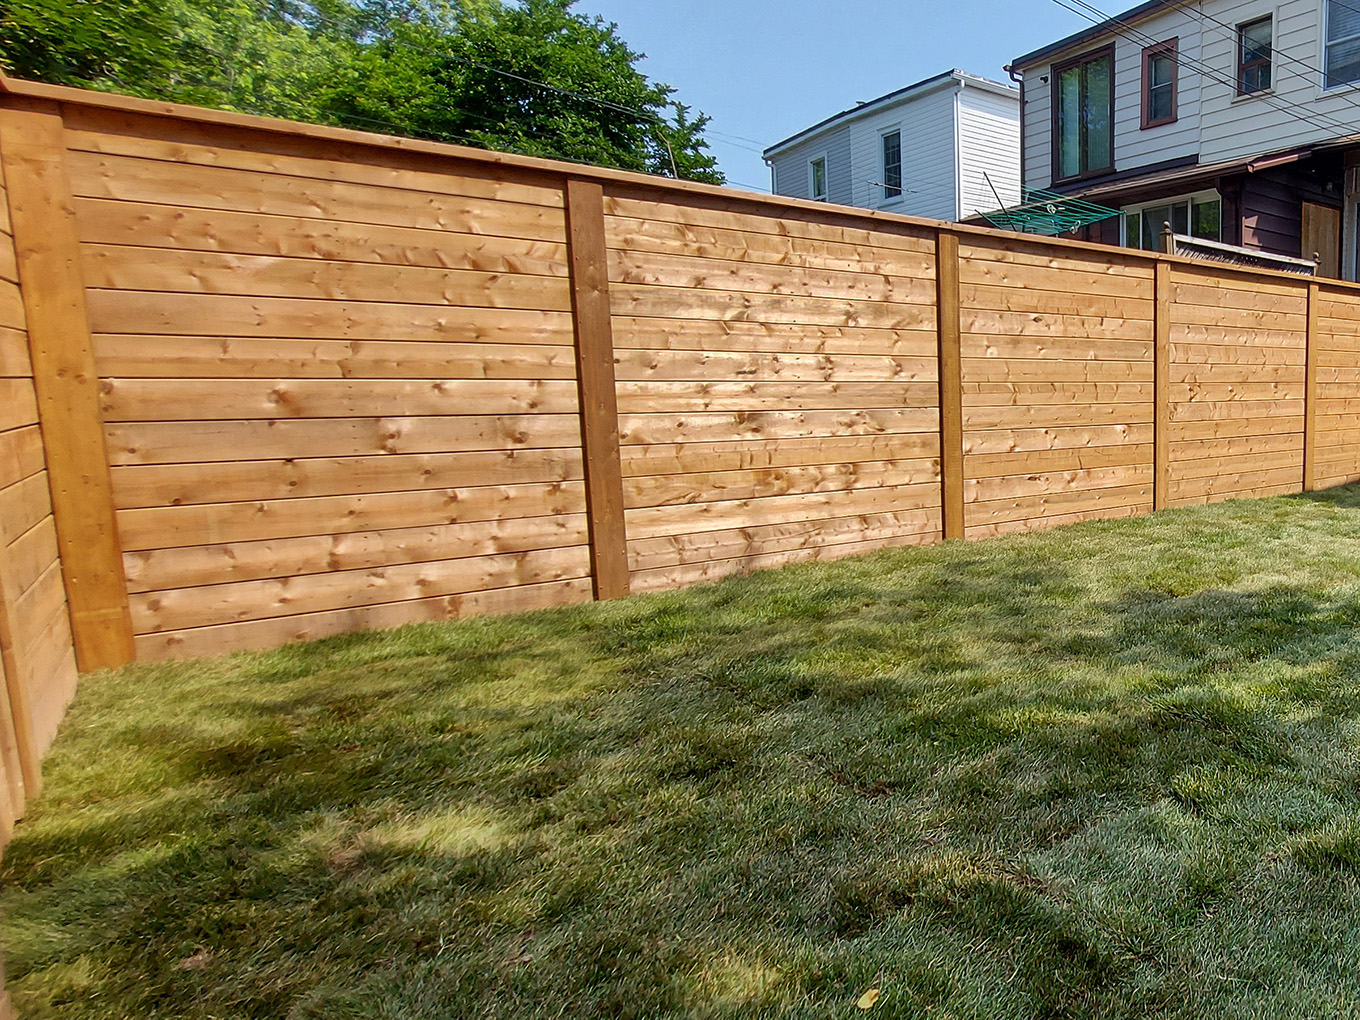 Maple Vaughan Ontario residential fencing company